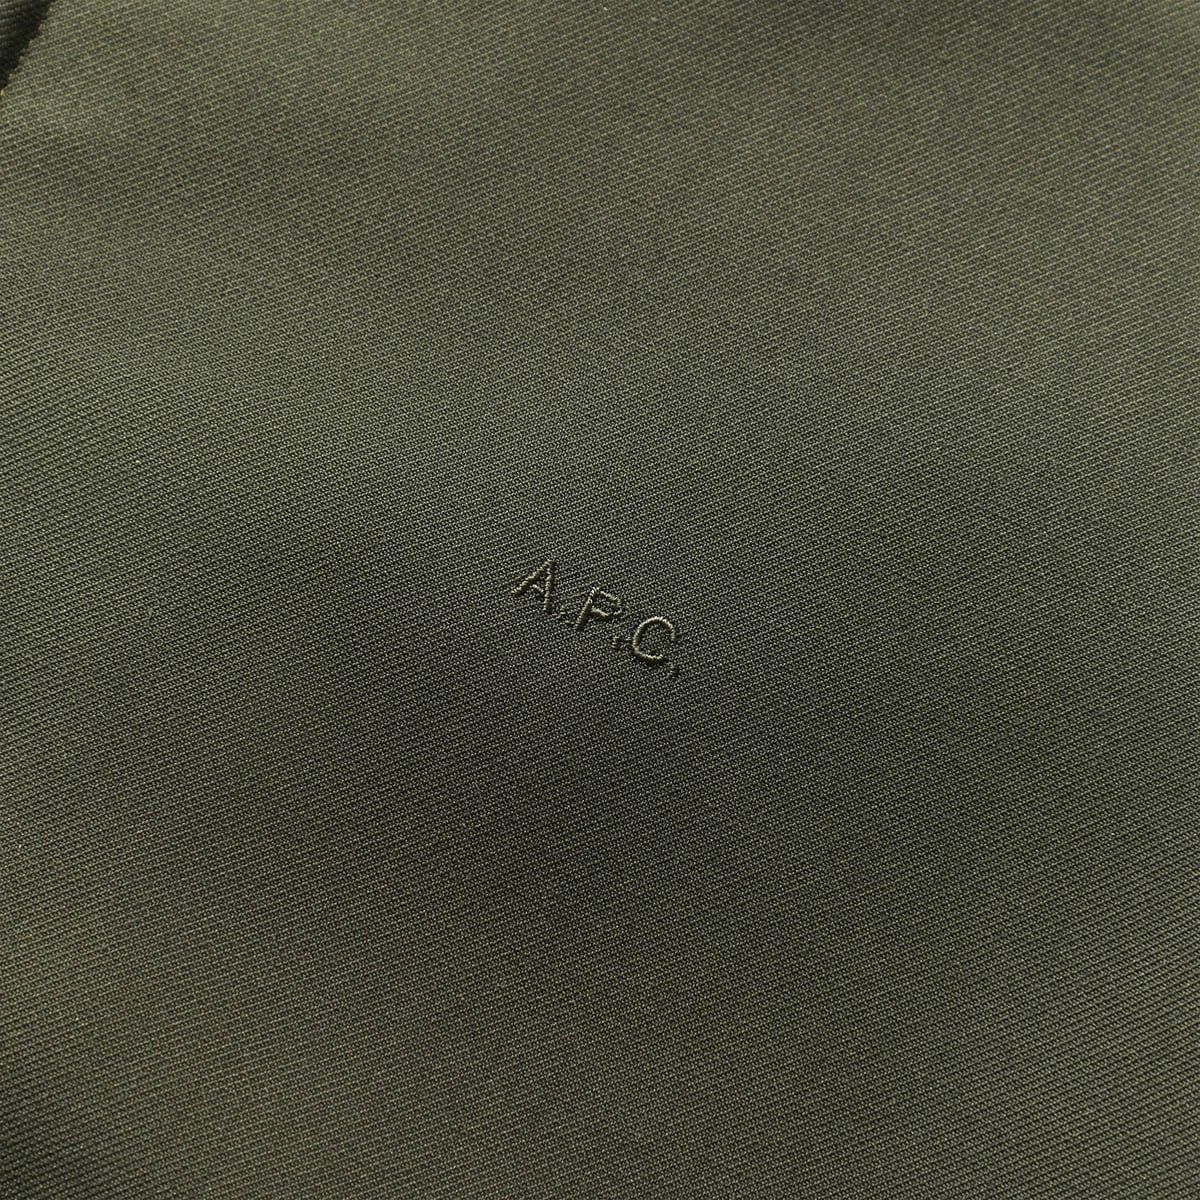 A.P.C. Outerwear BLOUSON SUTHERLAND BRODE